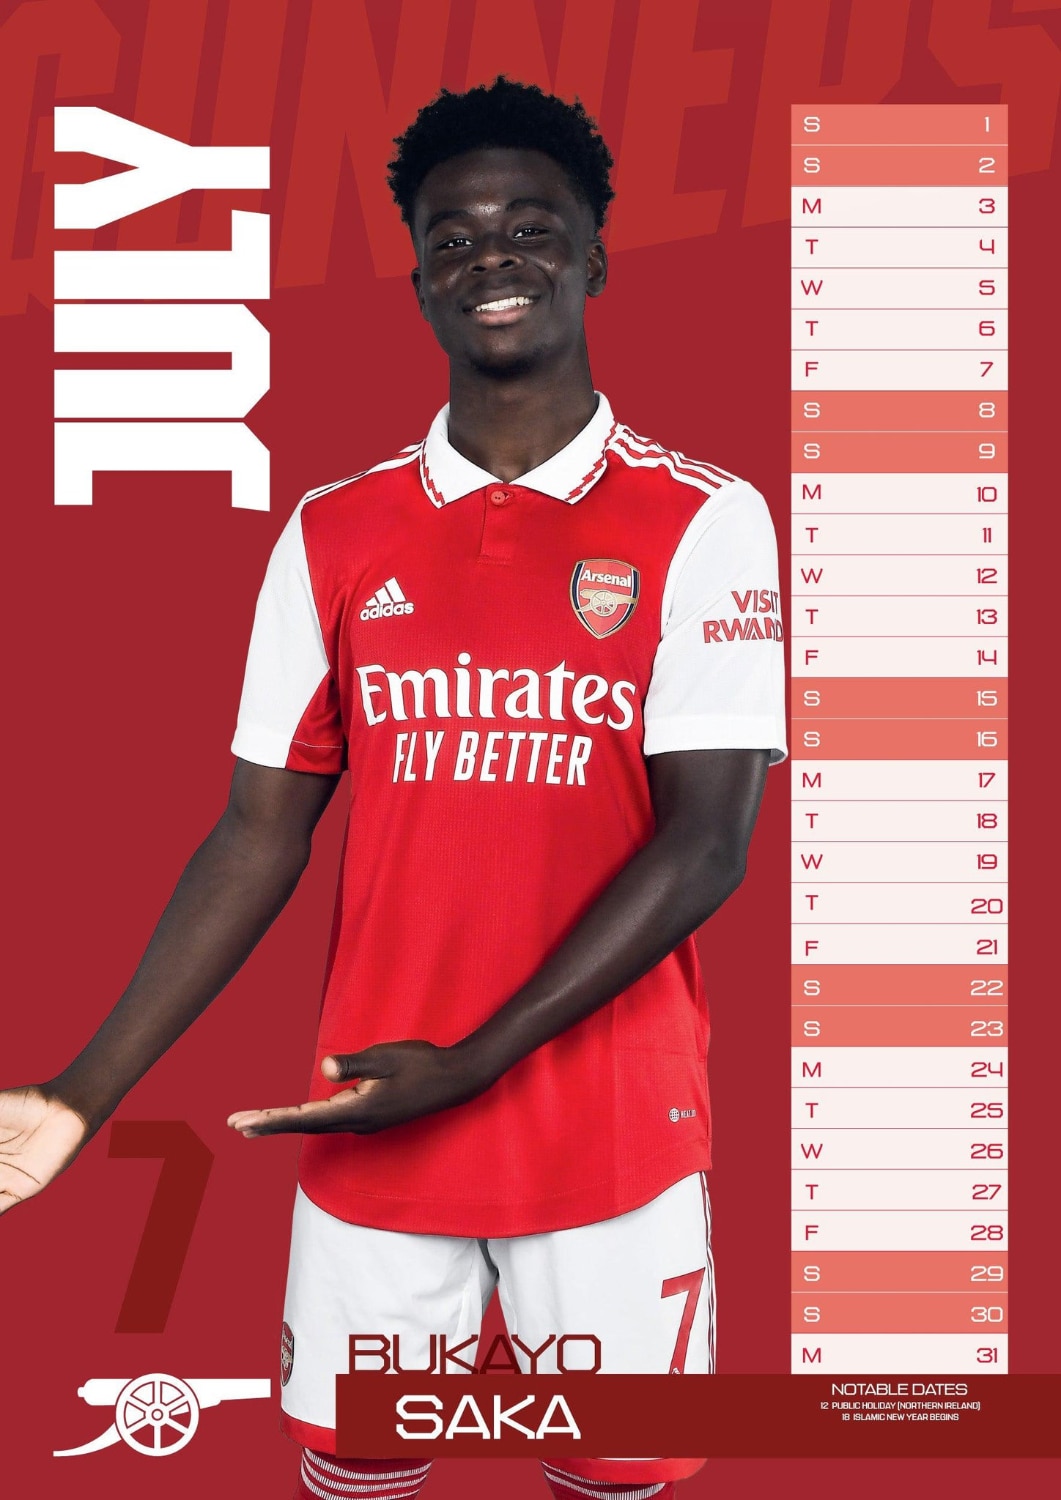 Official Product Arsenal Kalender 2023